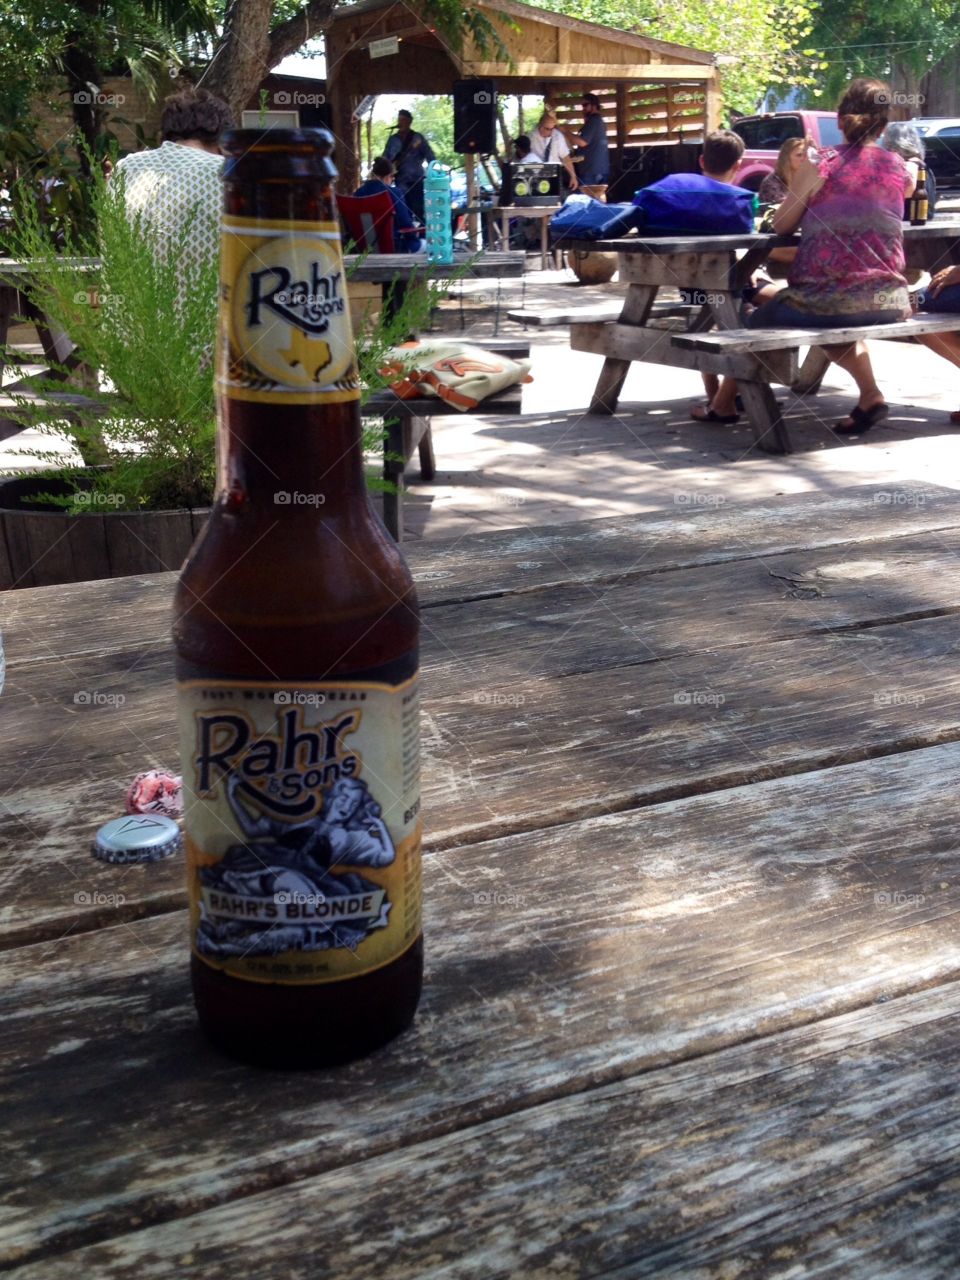 Summer in Texas . Having a nice cold beer and listening to music in Gruene, TX